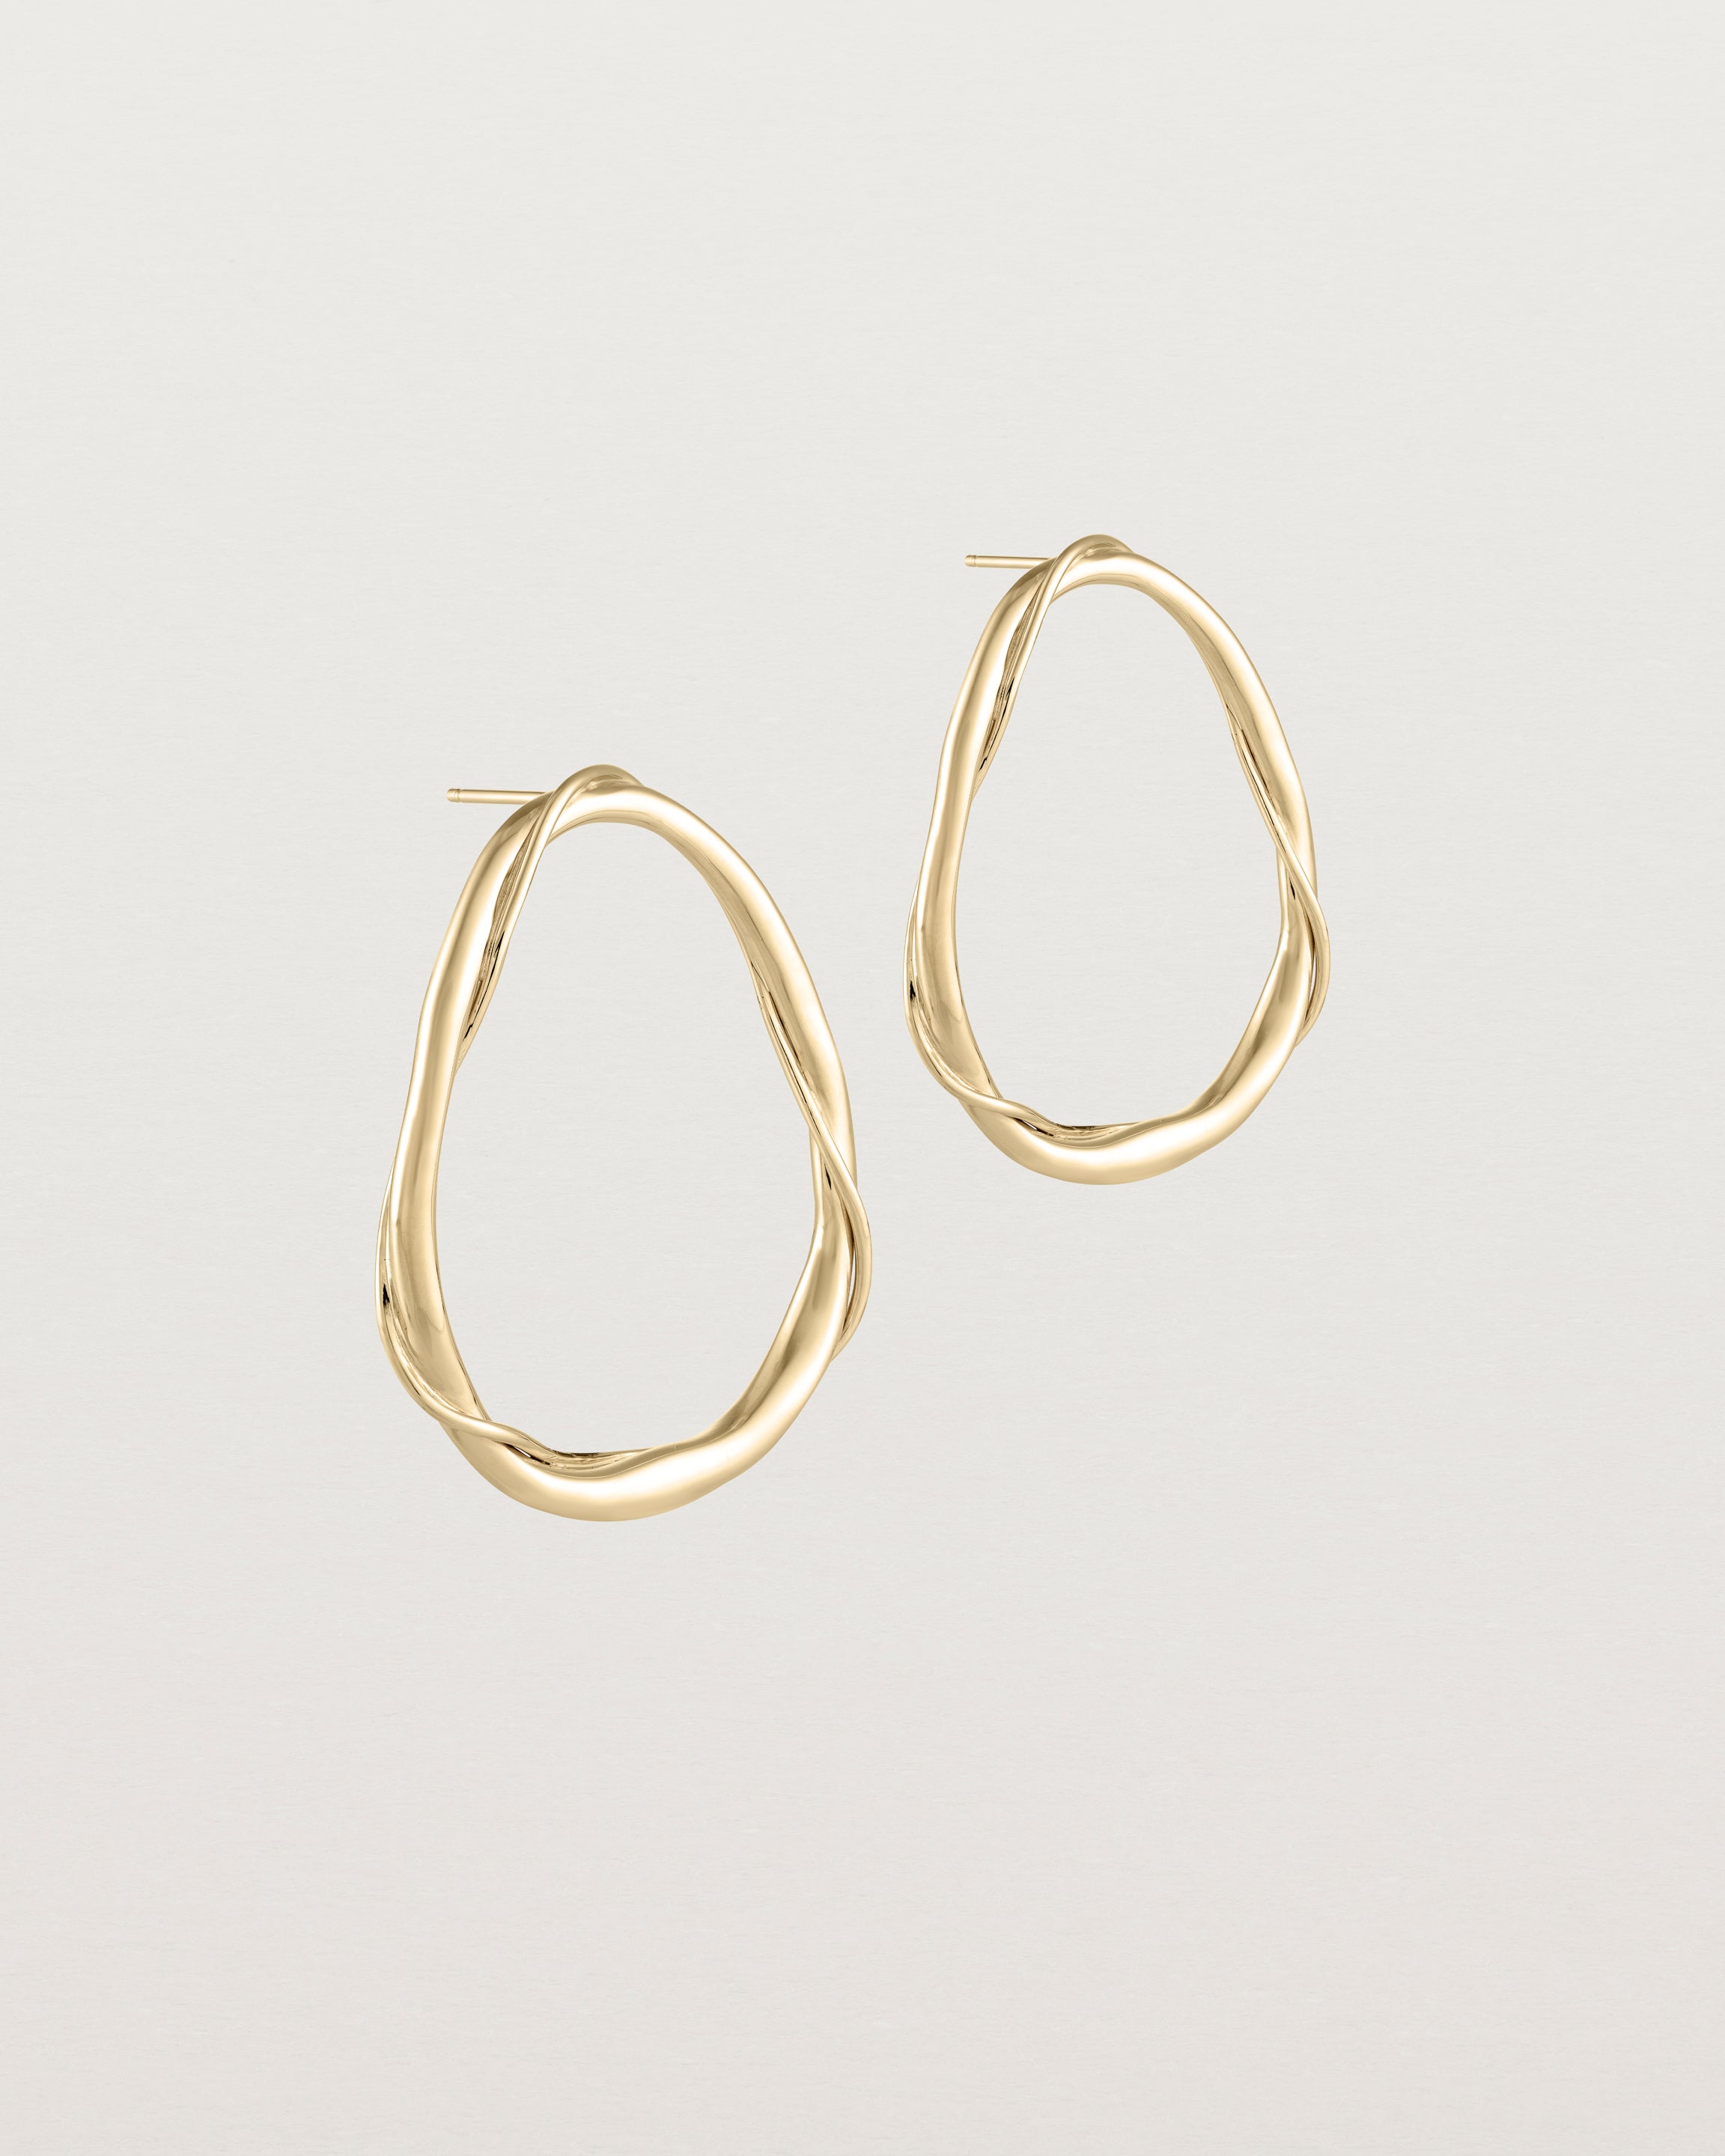 Angled view of the Dalí Earrings in yellow gold.